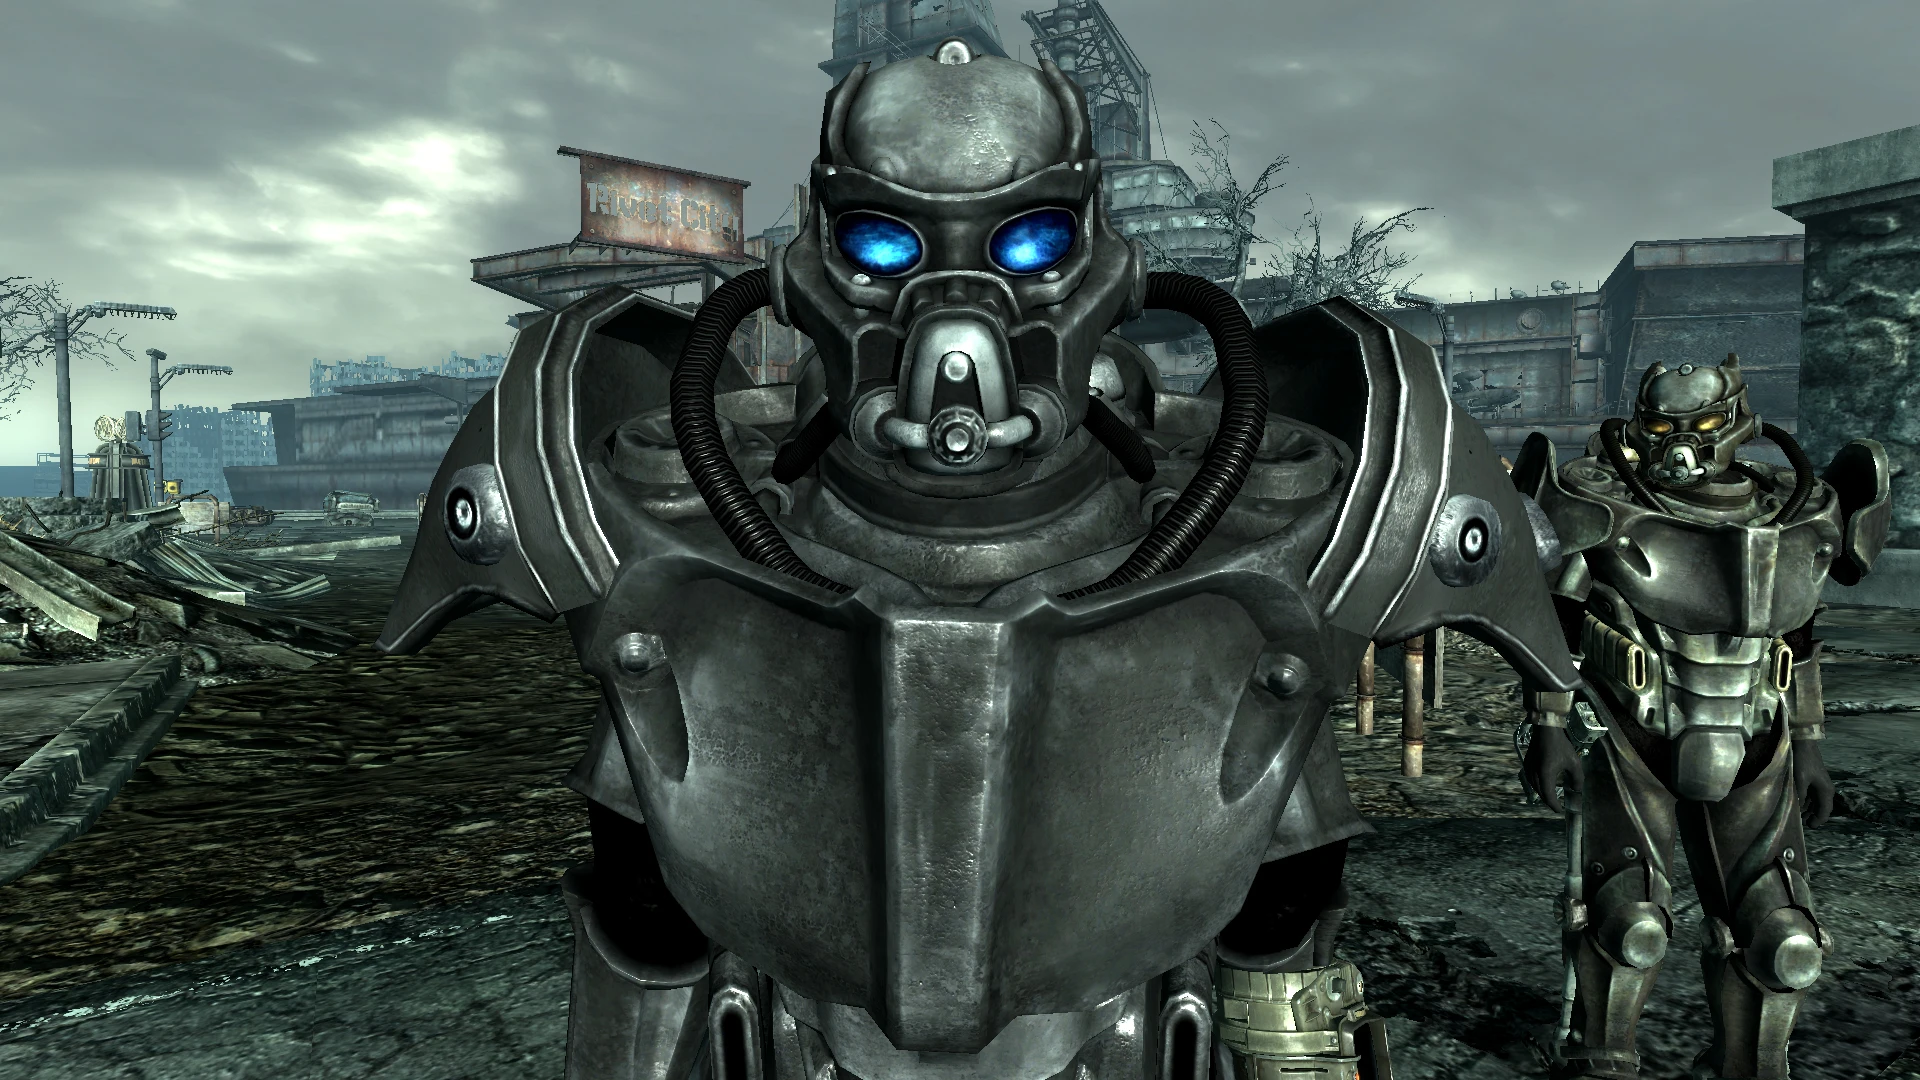 Hd Advanced Power Armor For New Vegas At Fallout New Vegas Mods And ...